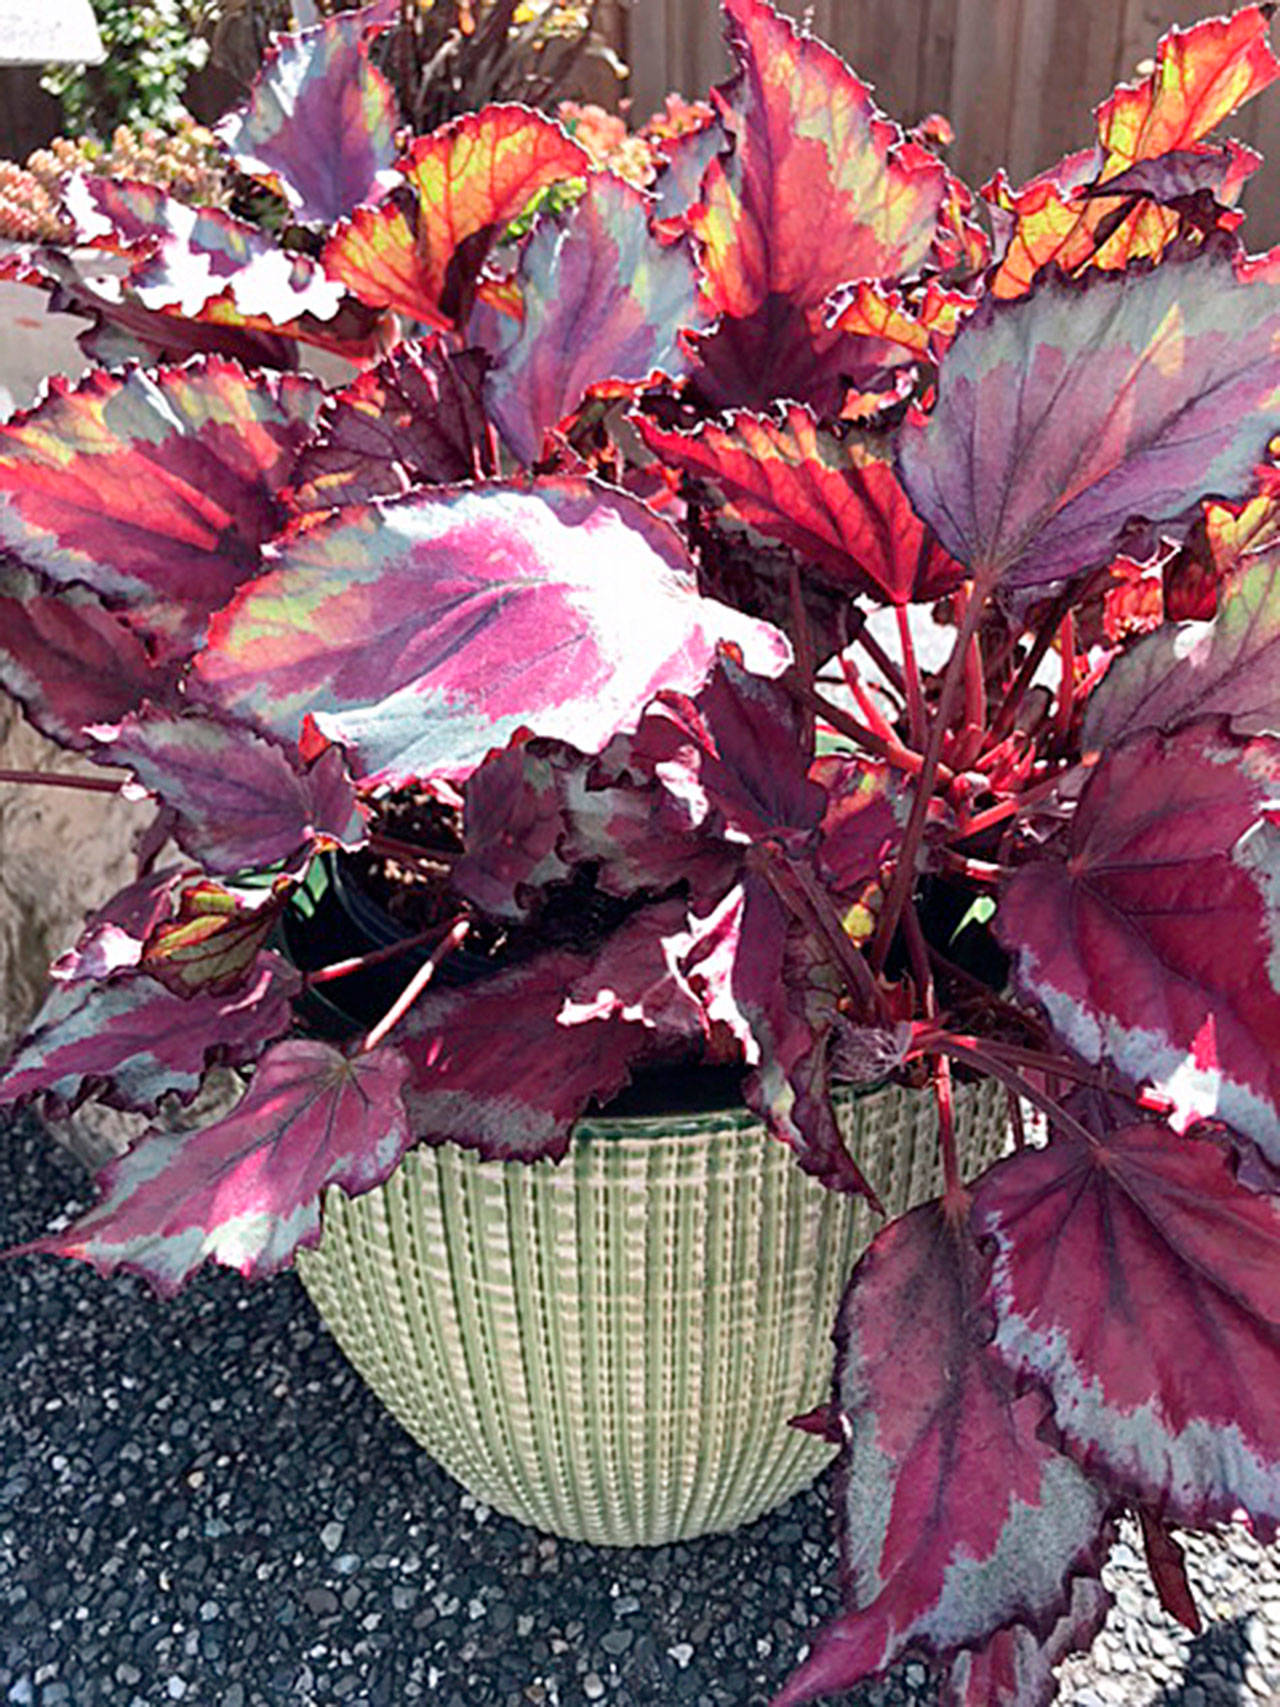 Propagating your begonias by taking 4- or 5-inch cuttings in late summer or early fall. Photo by Susan Kalmar